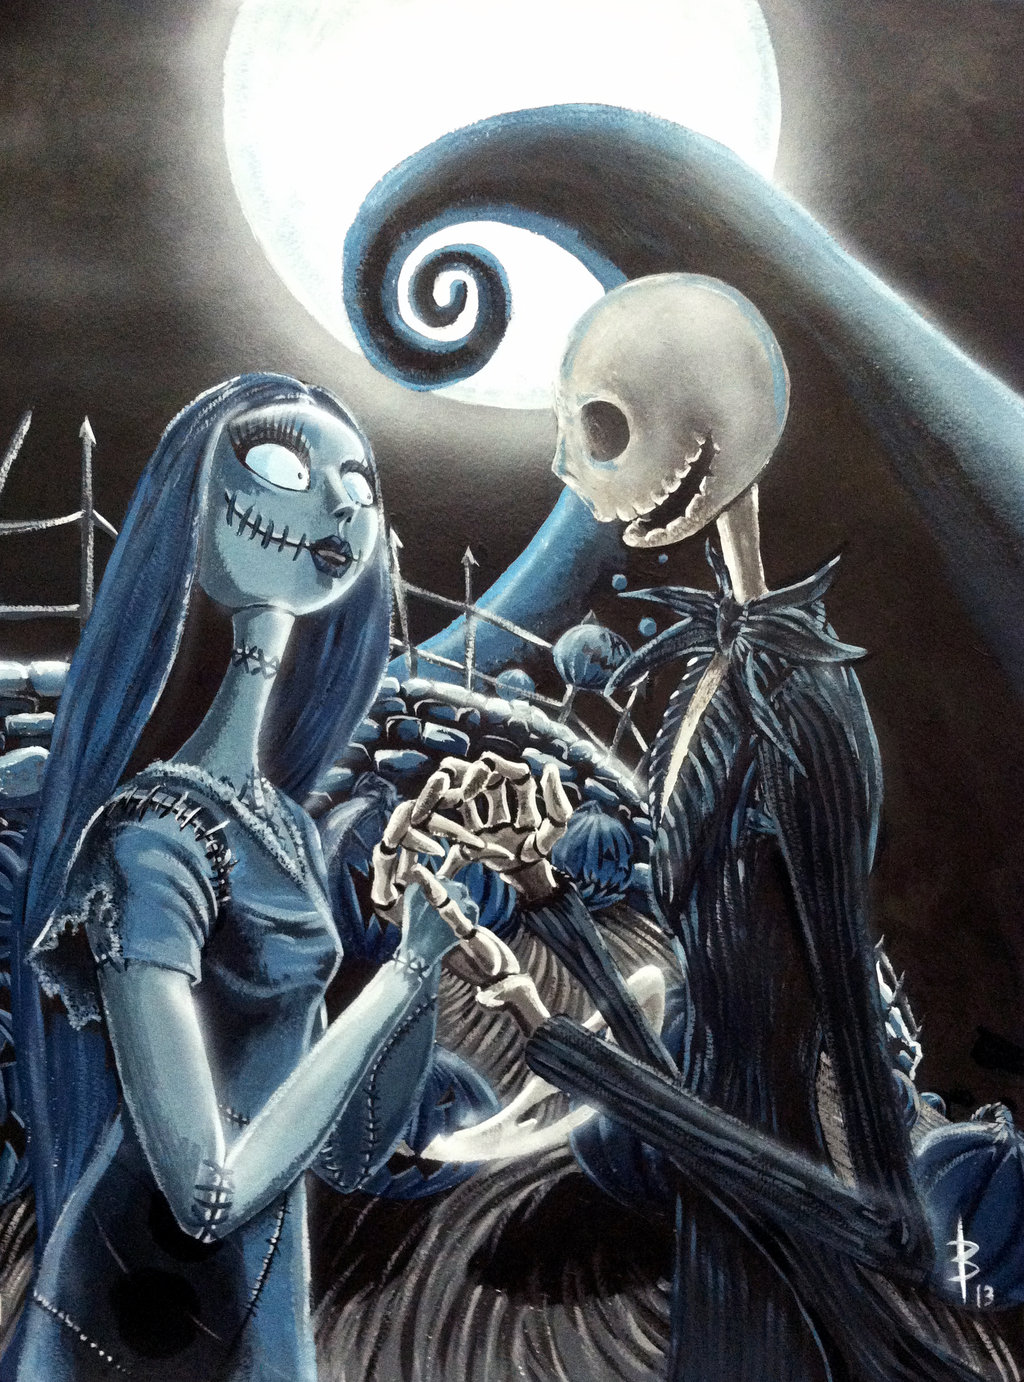 Jack Skellington And Sally Wallpapers